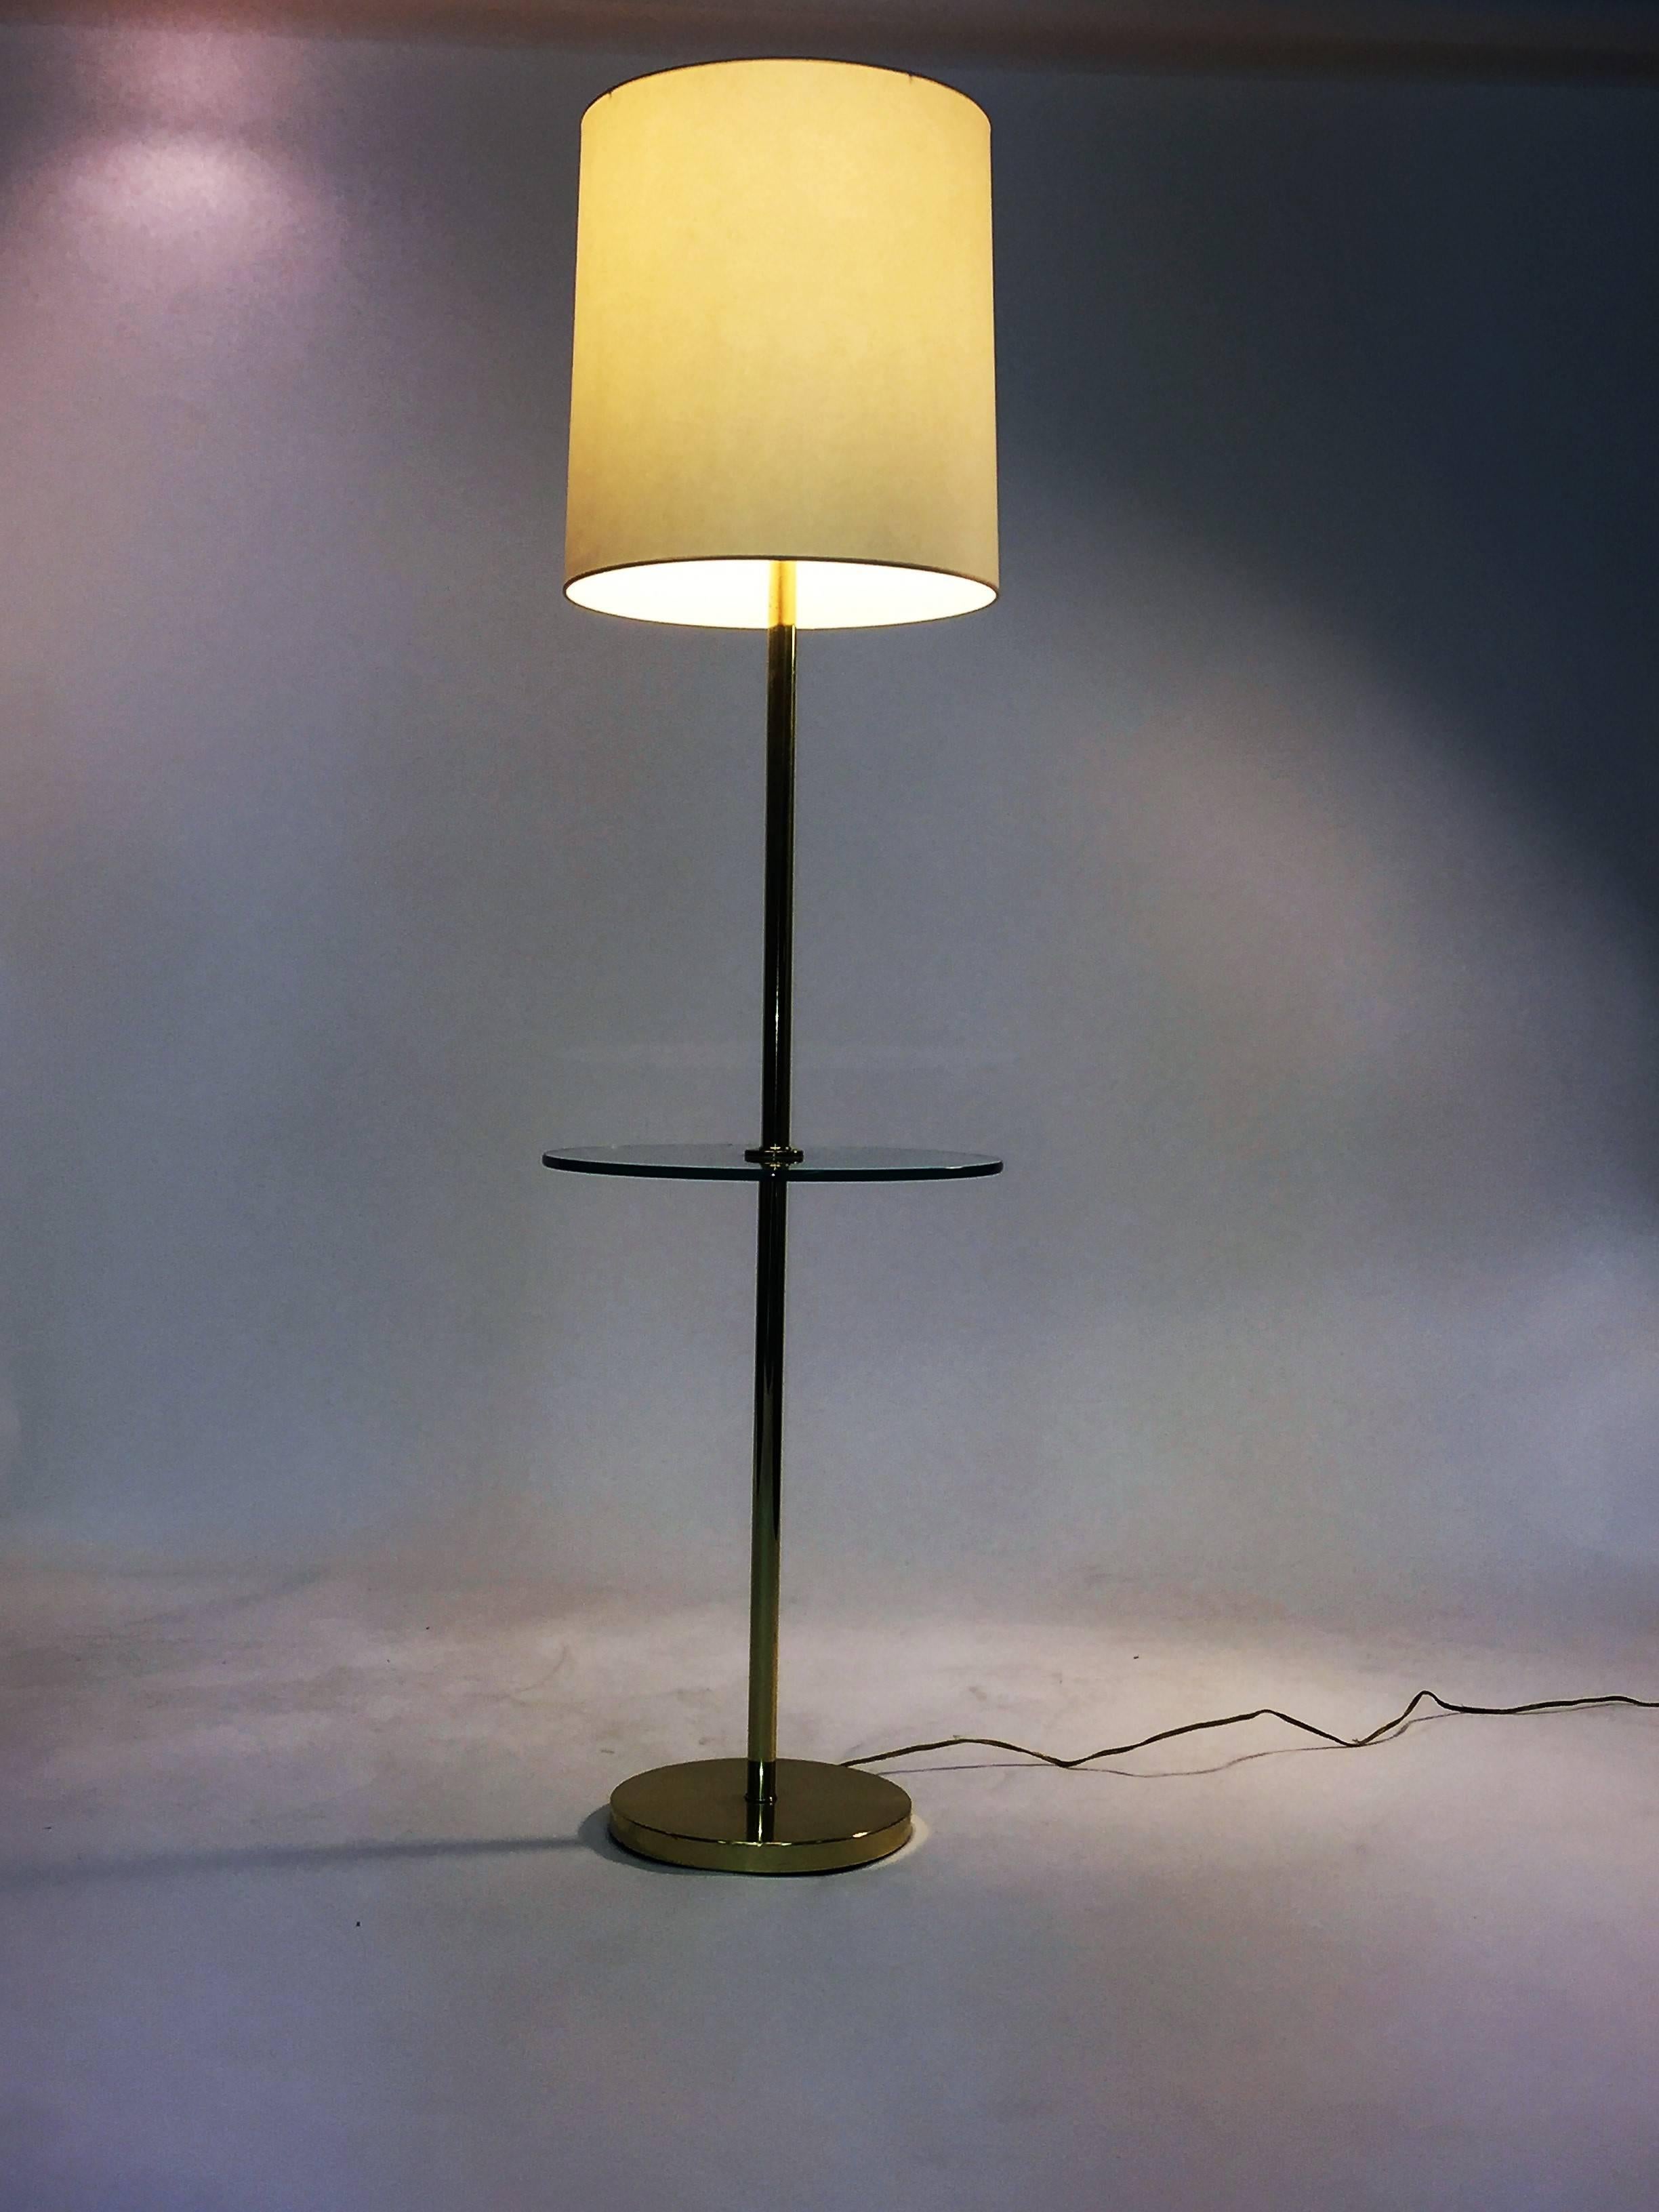 1970s round glass attached table brass floor lamp with brass ball design finial. Taking one standard bulb with the switch on the top. The round brass base measures at 10